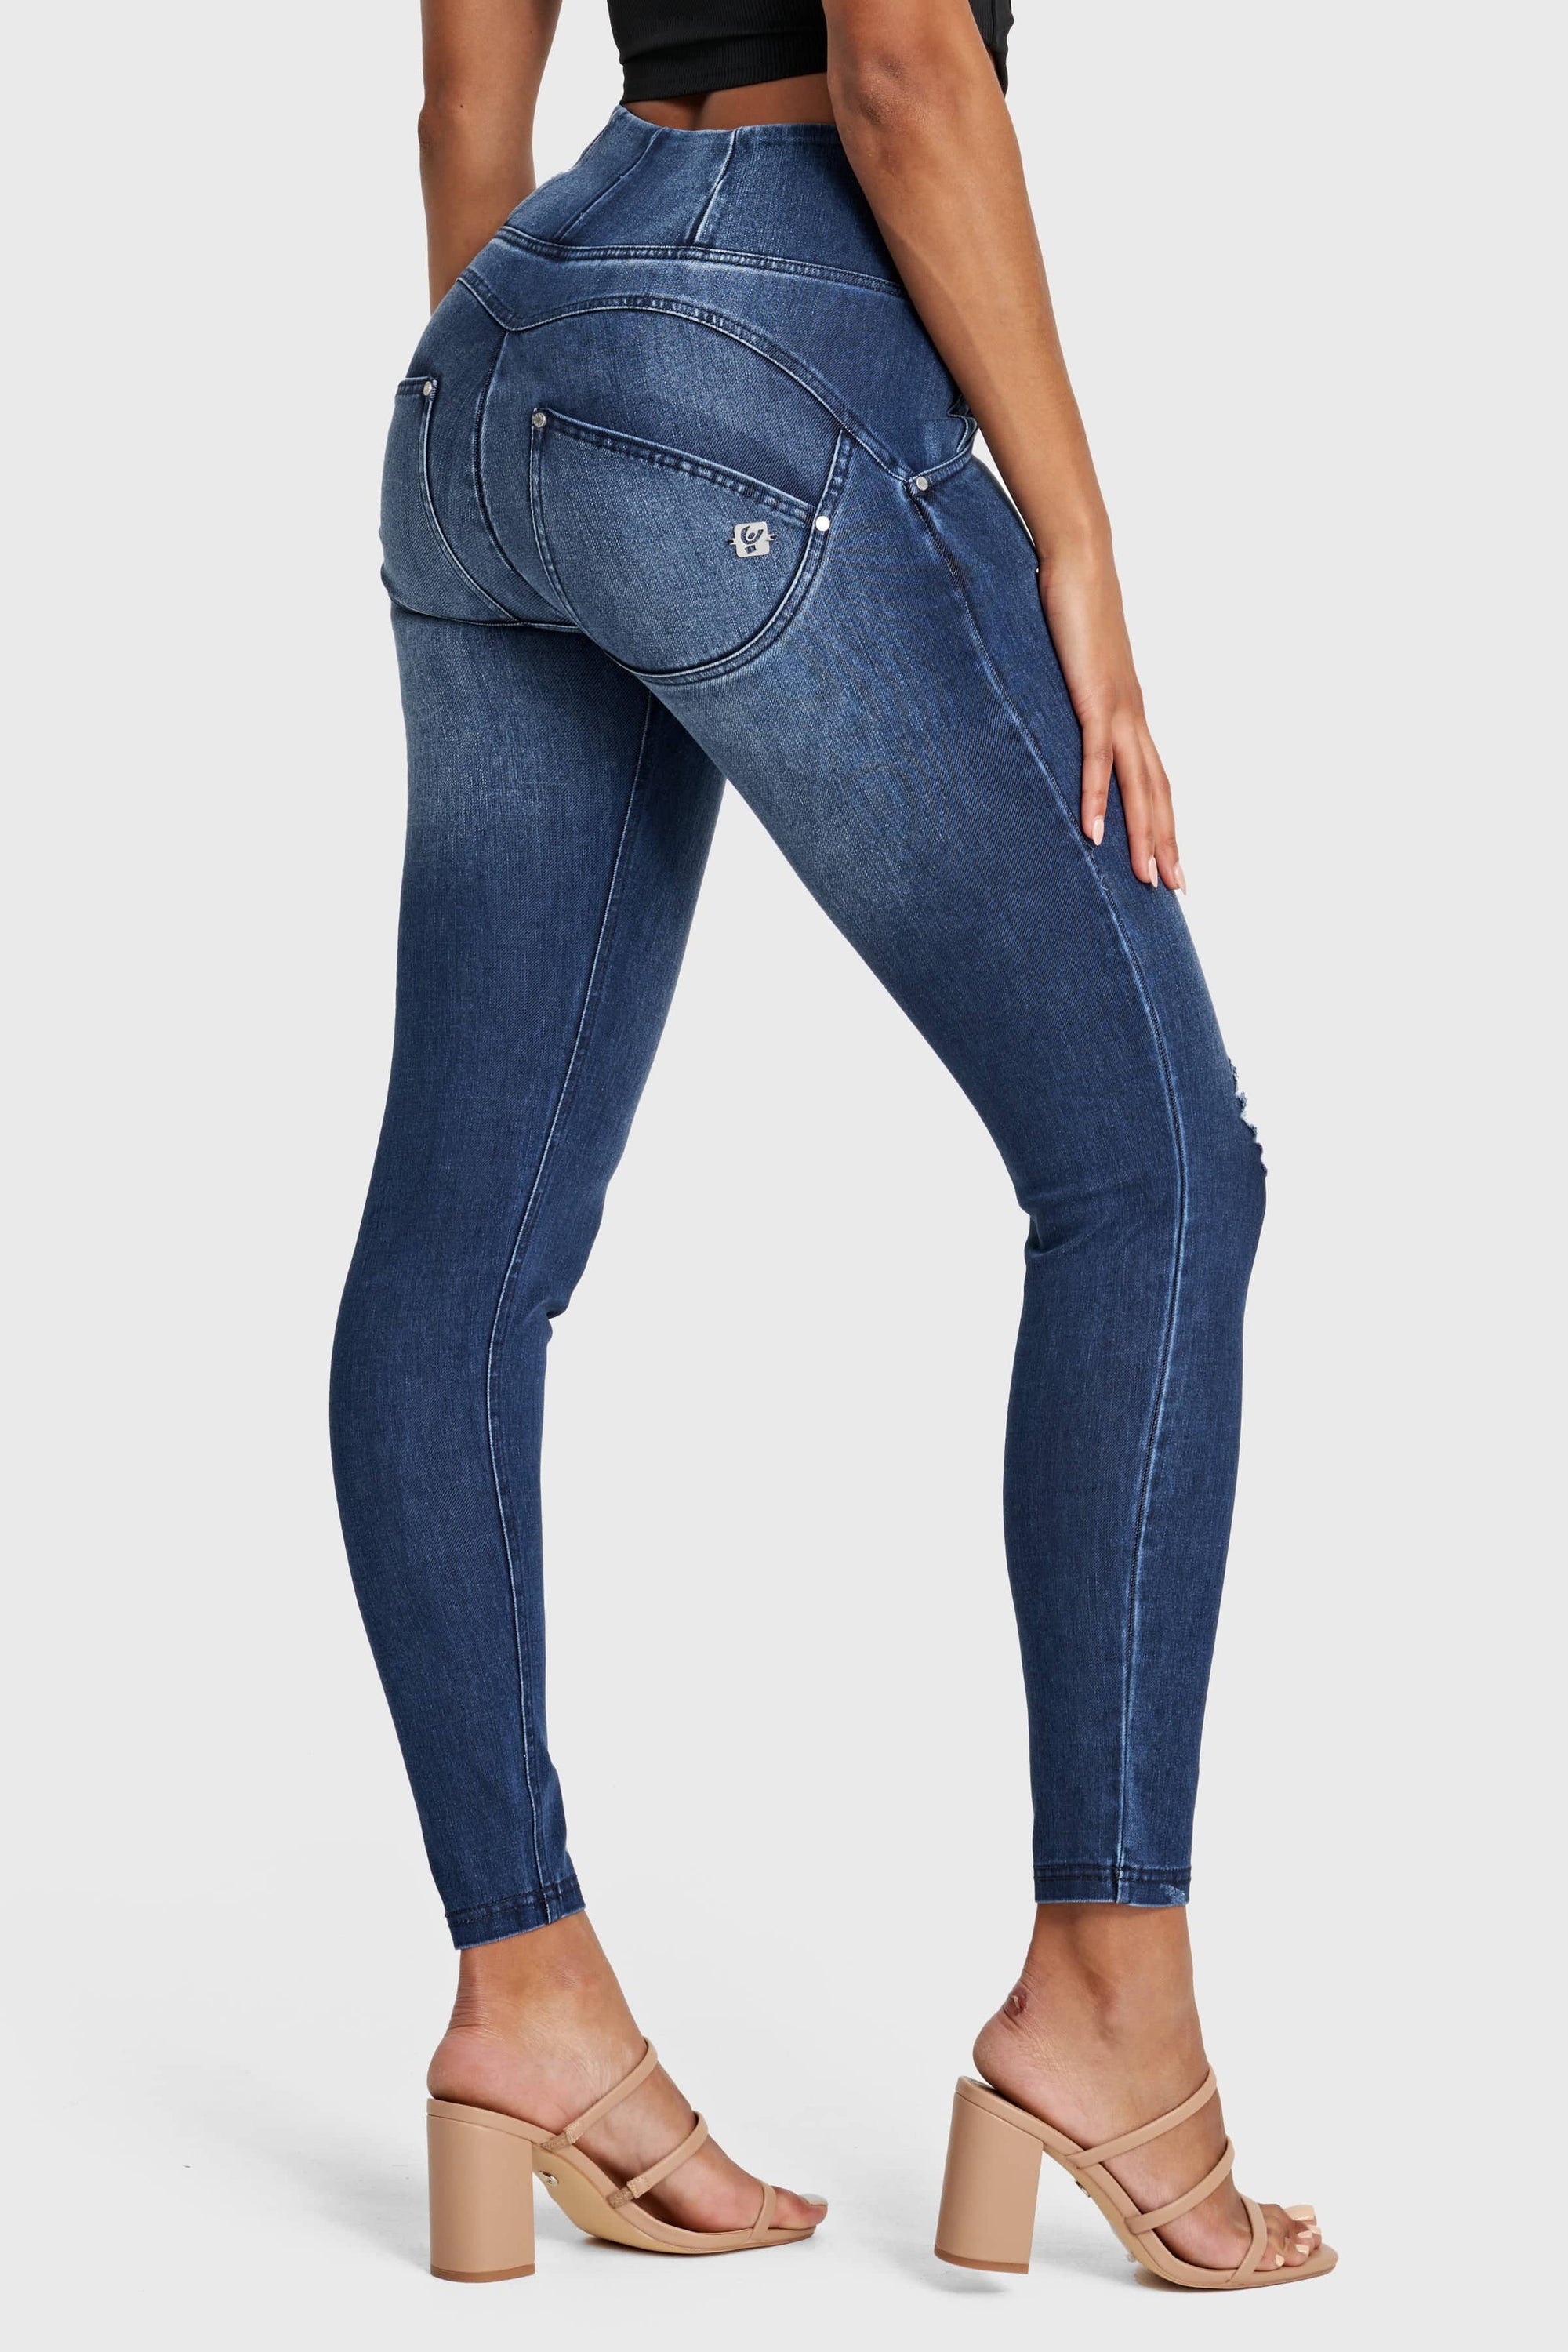 WR.UP® Snug Distressed Jeans - High Waisted - Full Length - Dark Blue + Blue Stitching 10